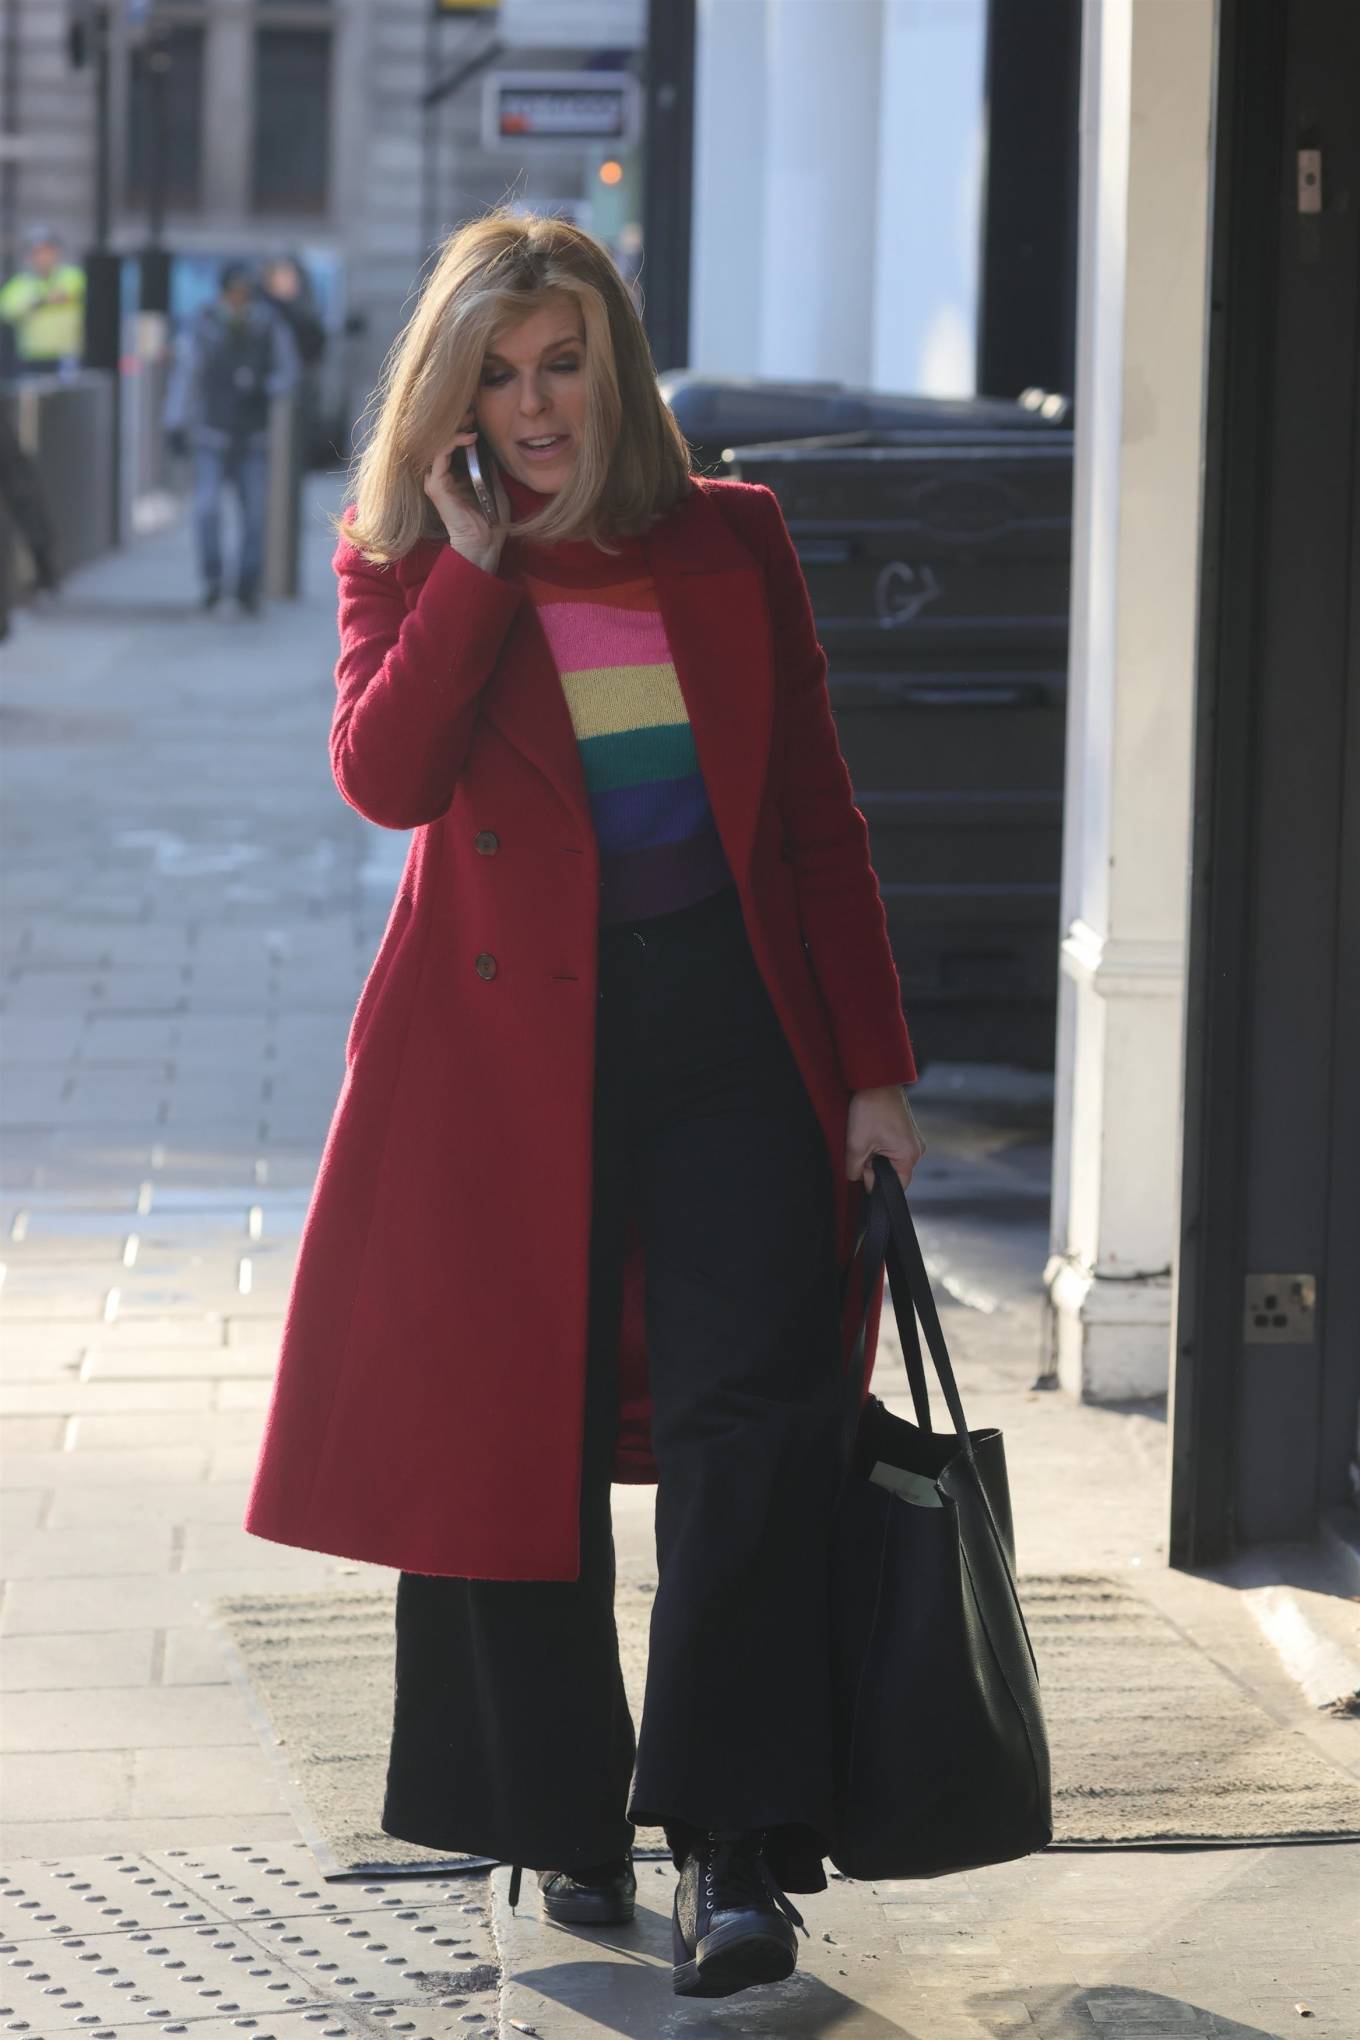 Kate Garraway 2022 : Kate Garraway – Out in a rainbow top and red coat earring at Global offices in London-05